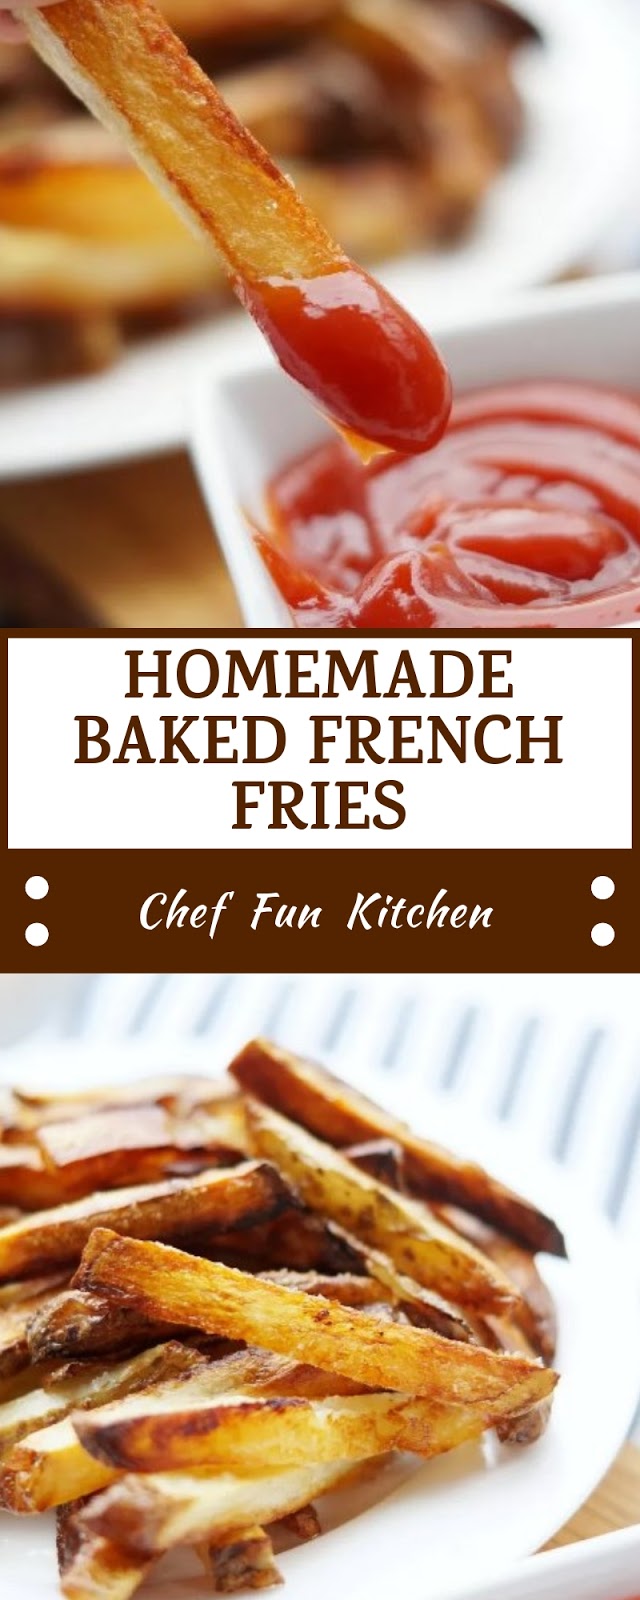 HOMEMADE BAKED FRENCH FRIES